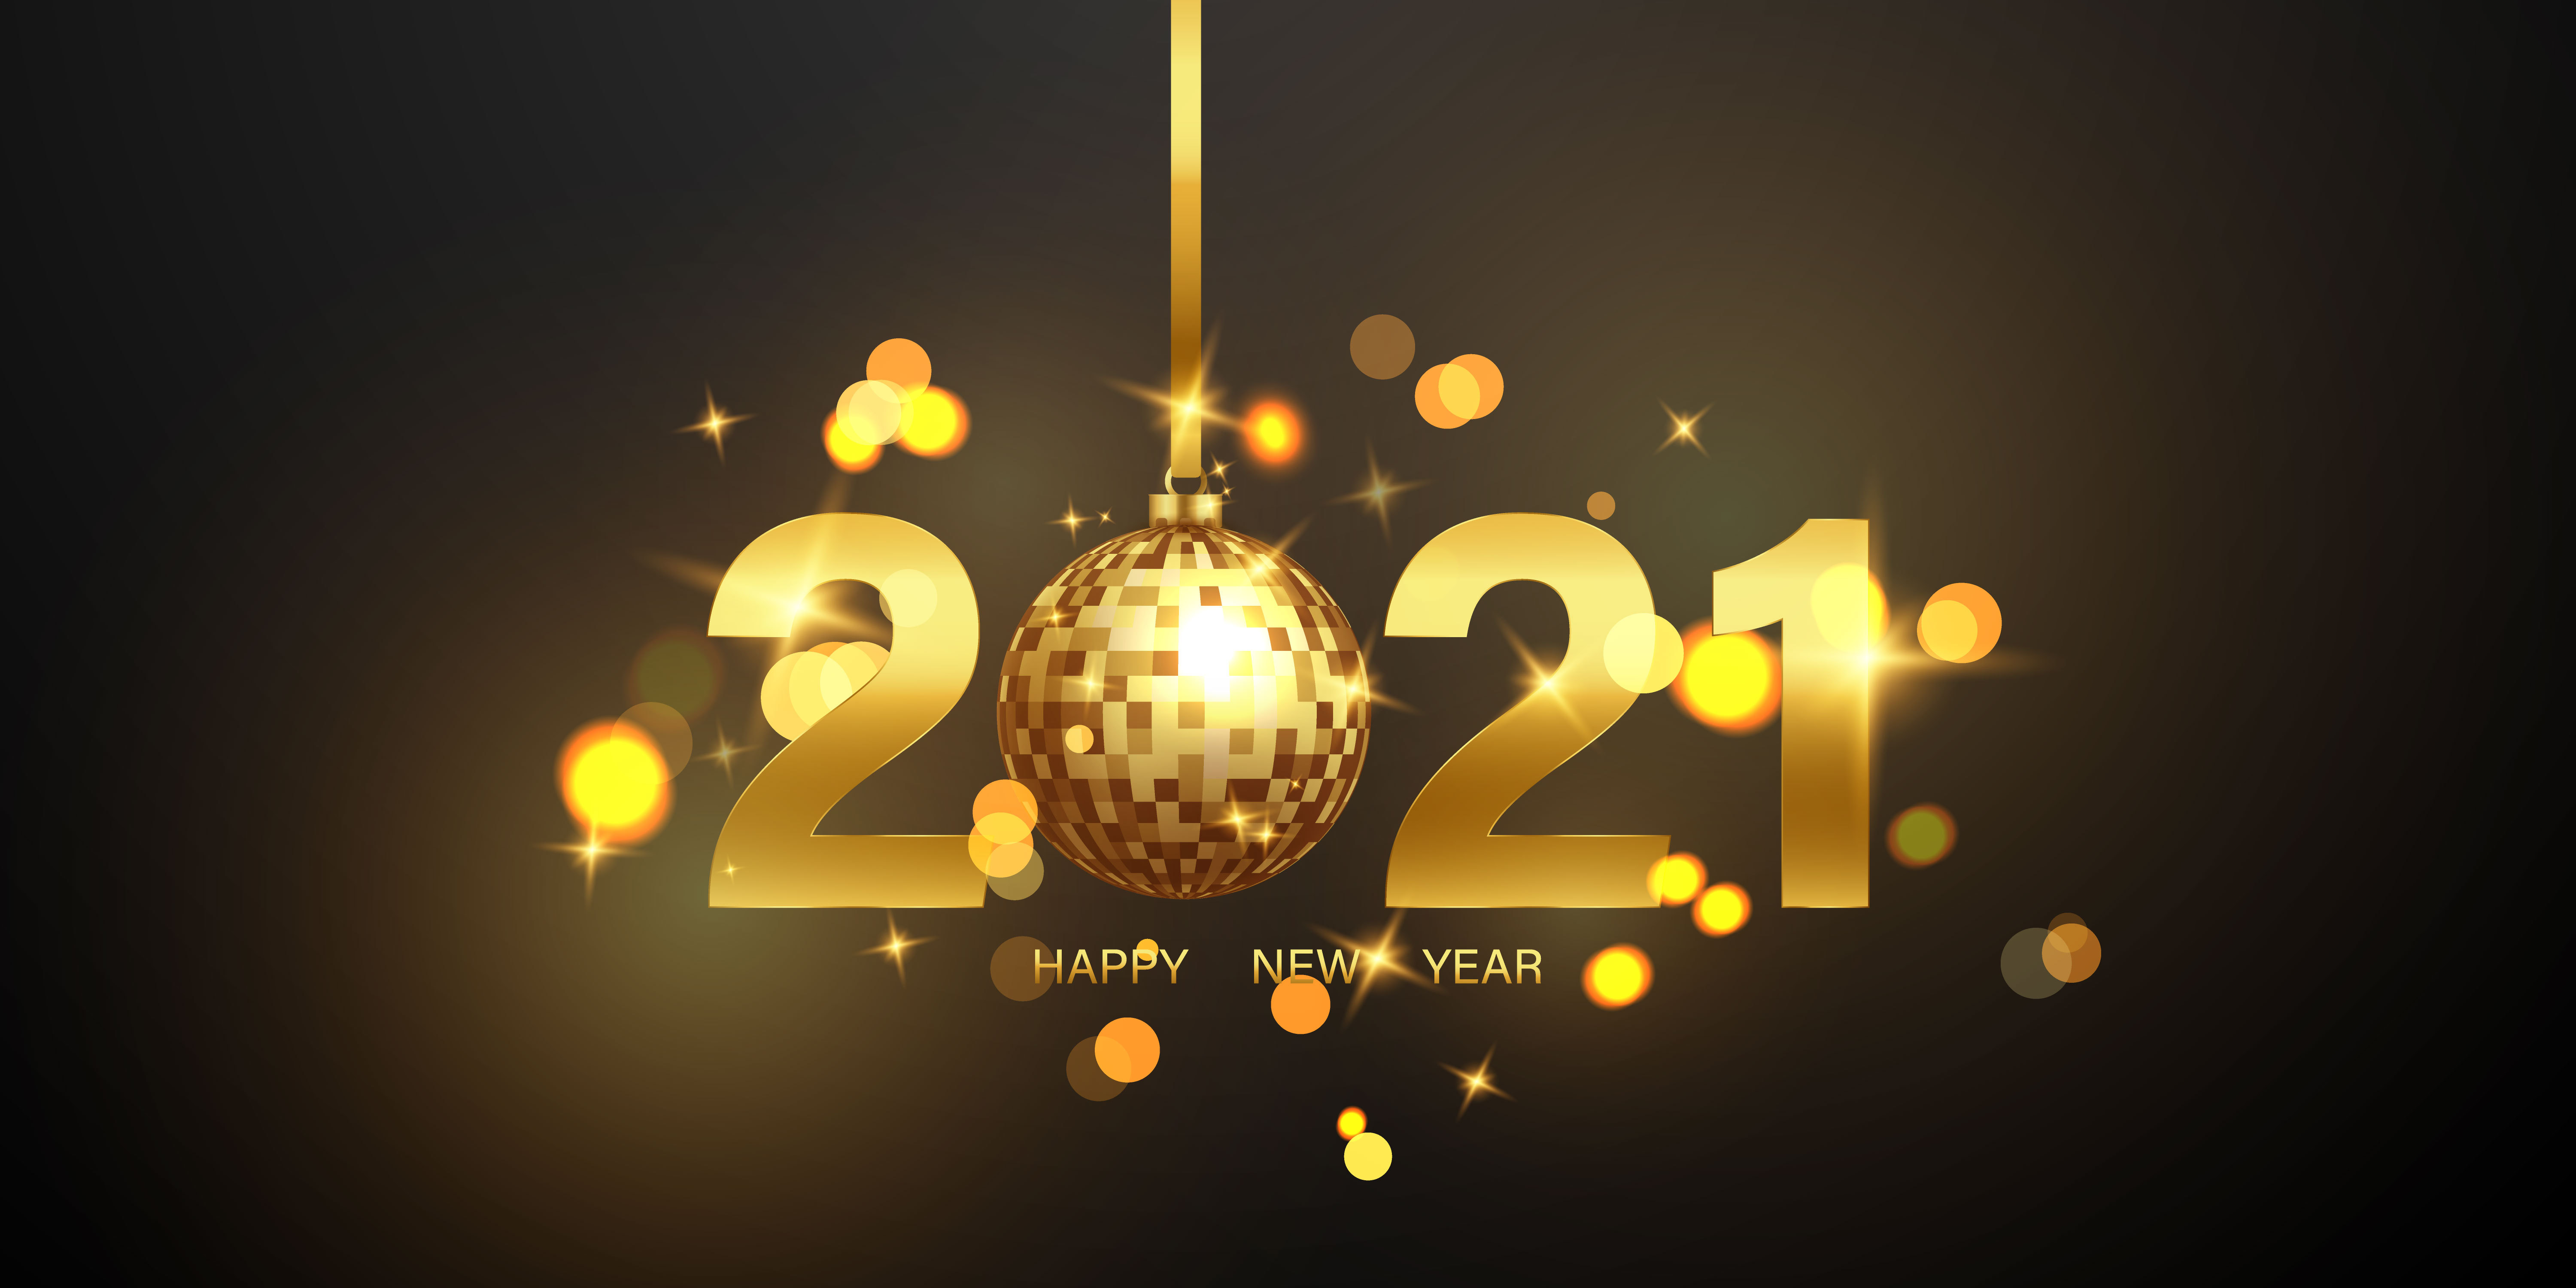 Happy New Year 2021 background. Greeting card design template gold. Celebrate brochure or flyer.